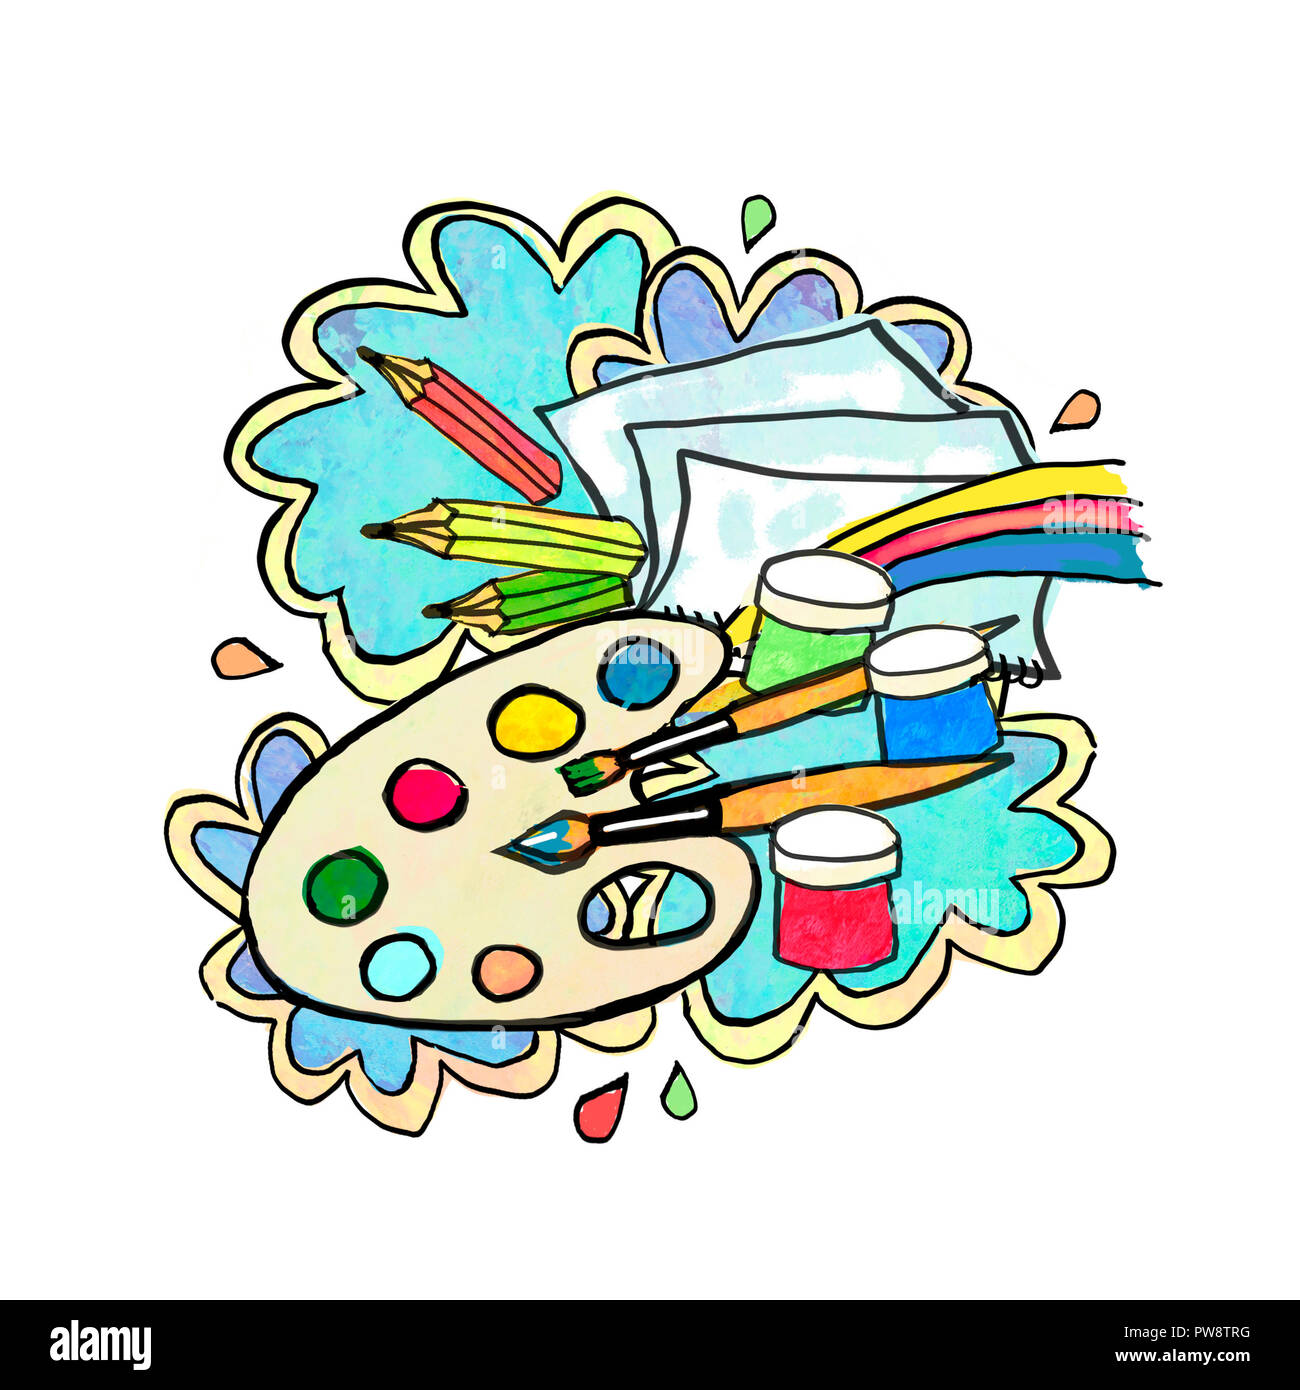 Hand-drawn cartoon collage of art tools - paint, palette, brushes, pencils,  paper. Funny art. Isolated composition on a white background. Illustration  Stock Photo - Alamy